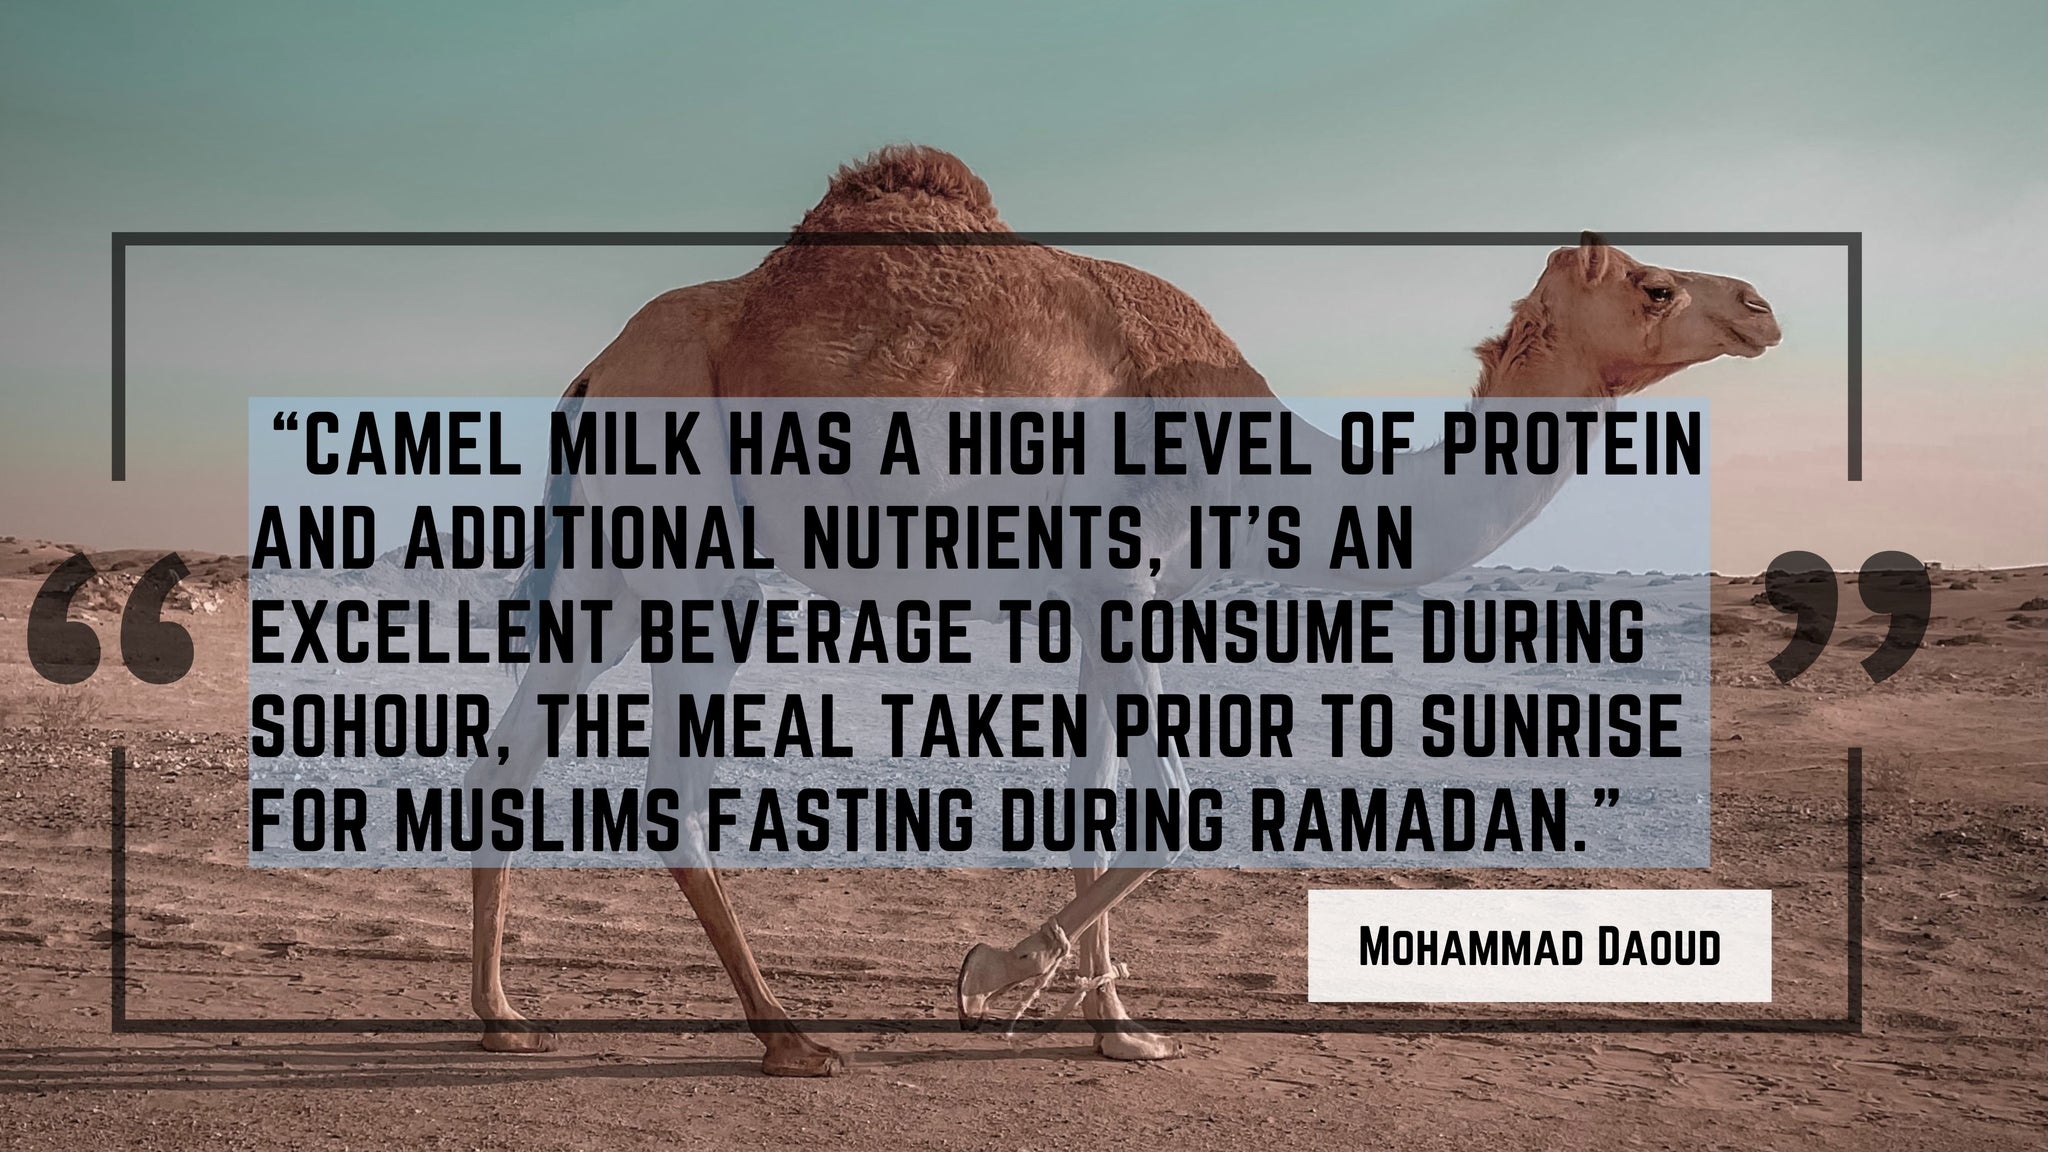 An image of a camel is displayed with a quote from Mohammad Daoud that reads: “Camel milk has a high level of protein and additional nutrients, it’s an excellent beverage to consume during Sohour, the meal taken prior to sunrise for Muslims fasting during Ramadan.” 